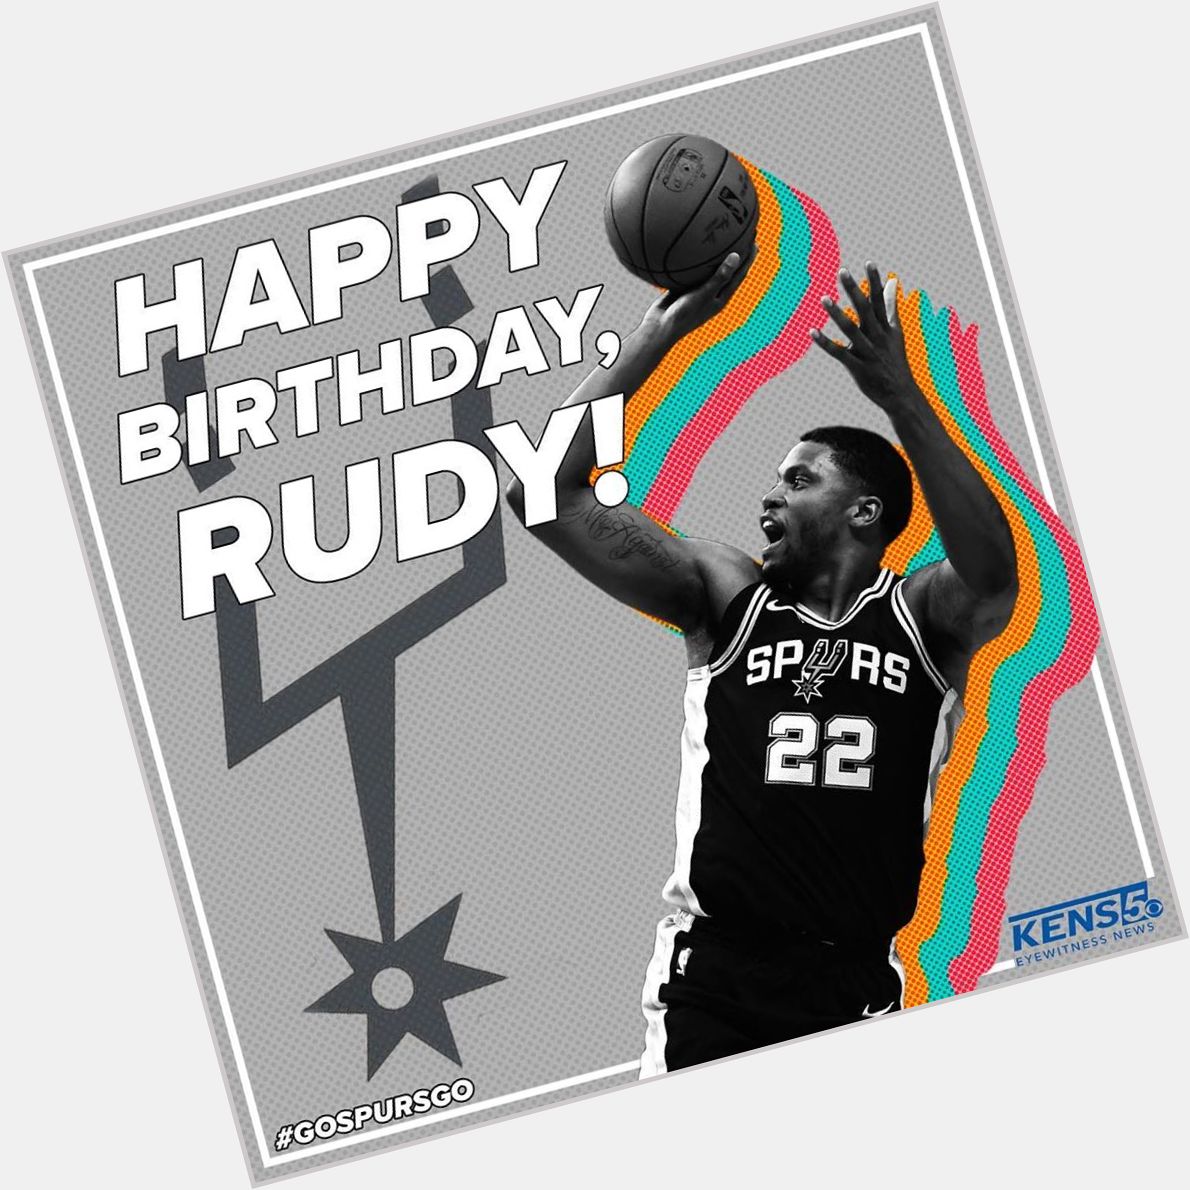 Join us in wishing a happy birthday to Rudy Gay!     